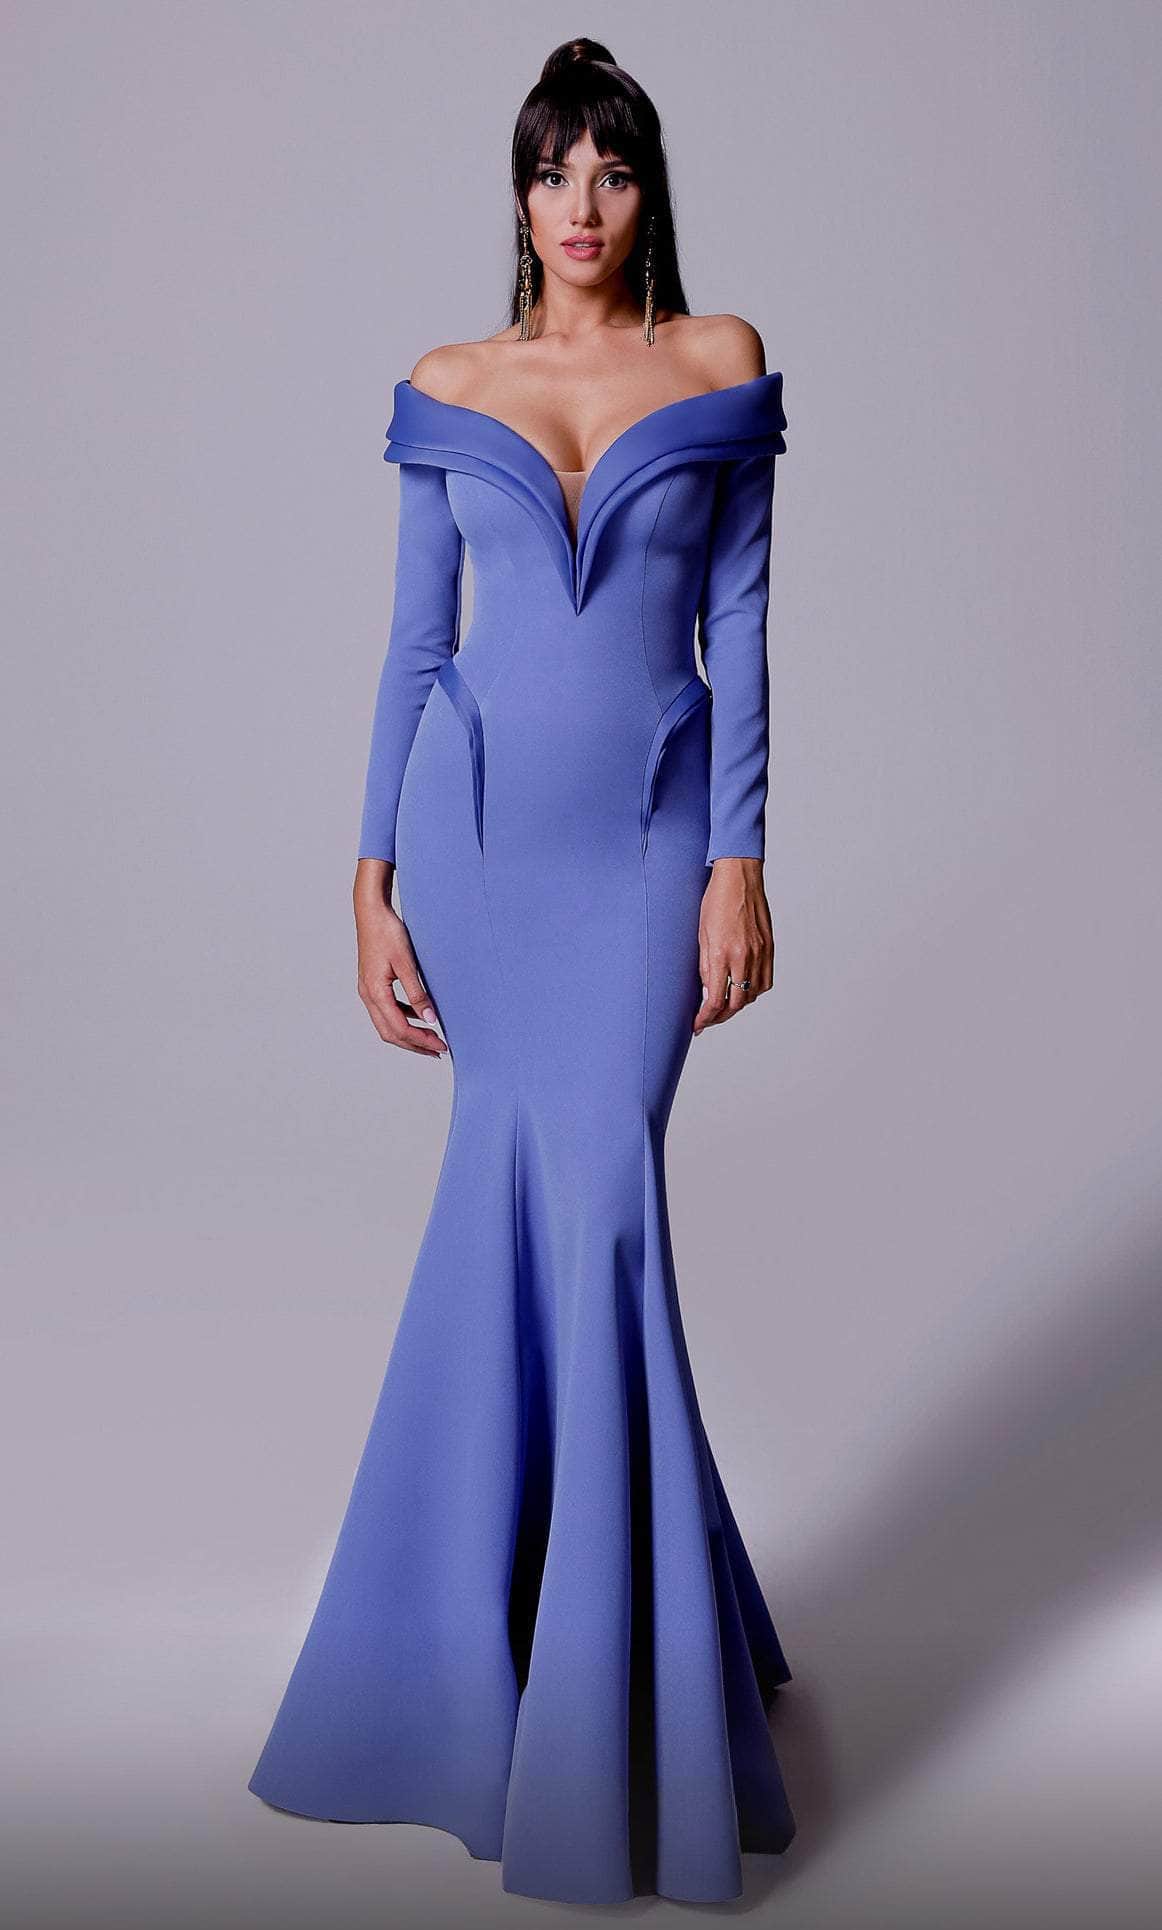 Image of MNM Couture 2711 - Side Peplum Formal Dress